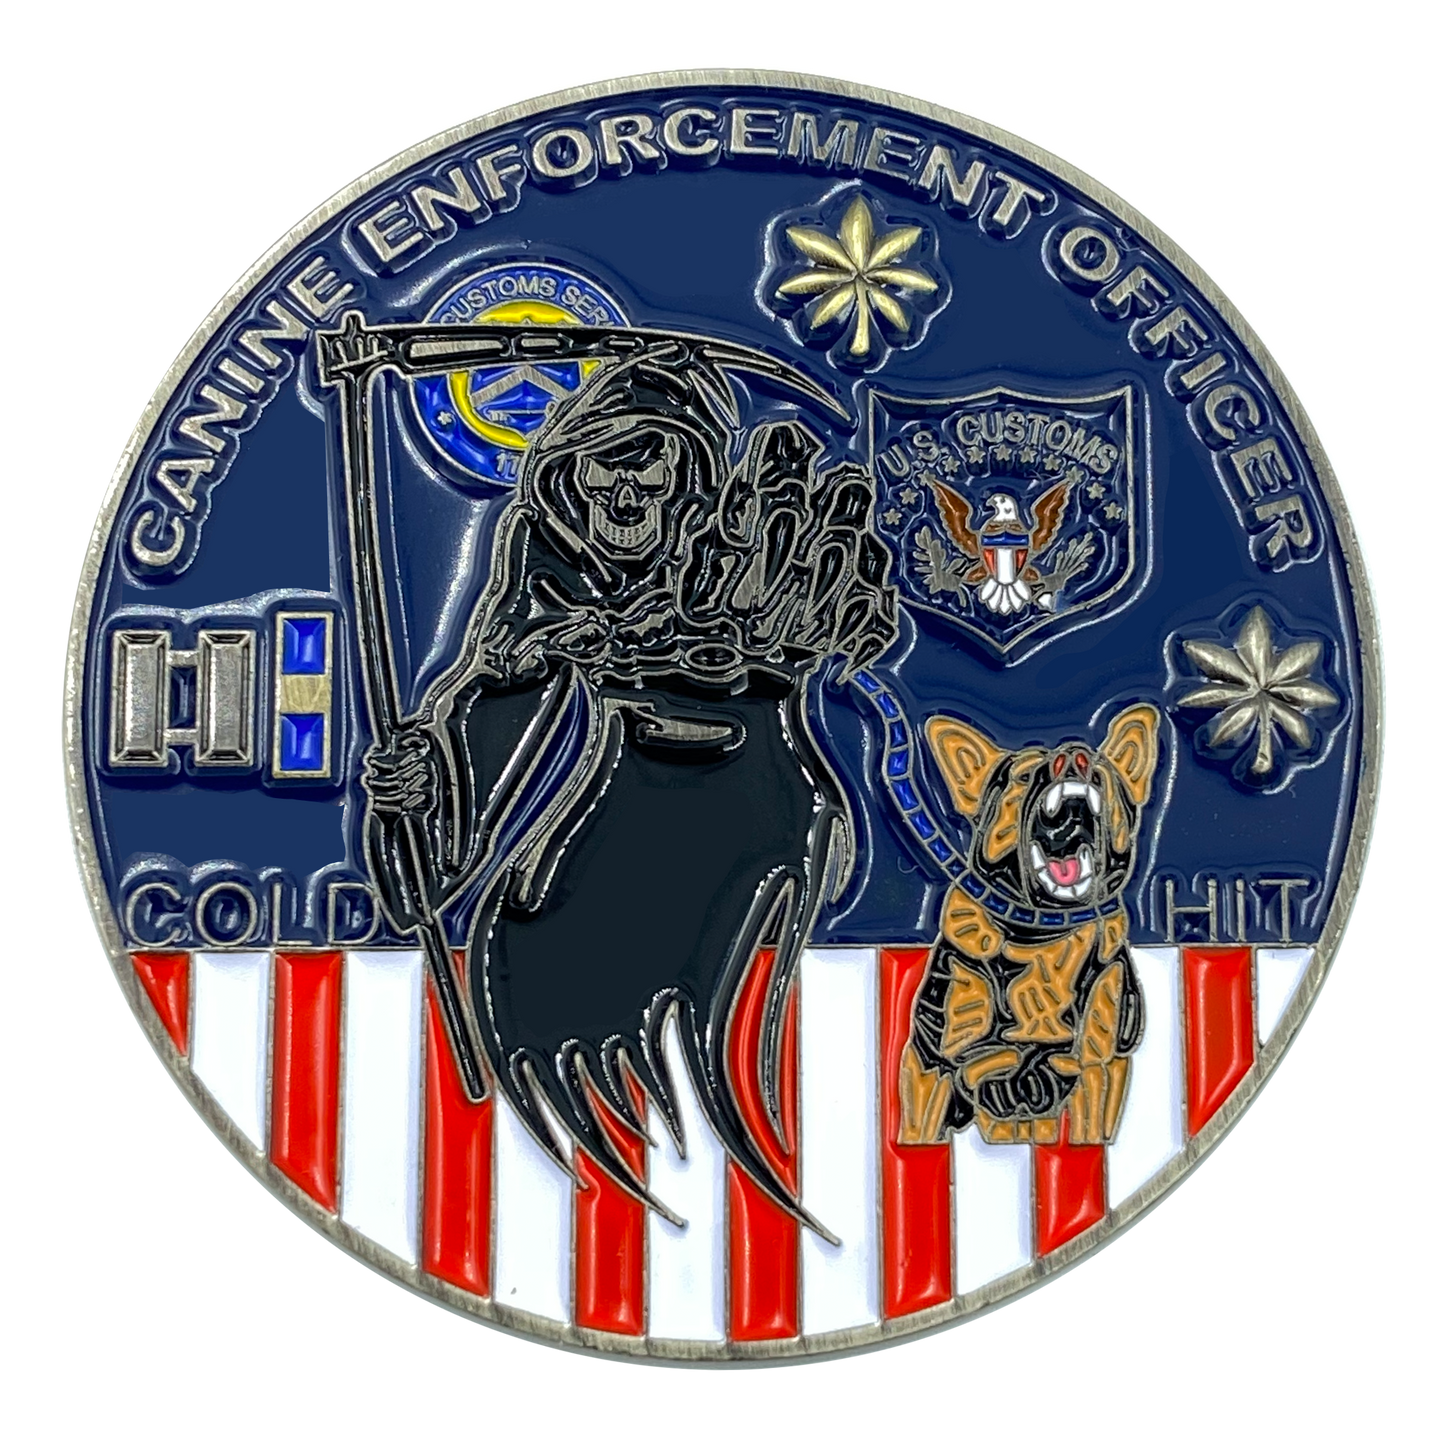 discontinued BB-010 Legacy US Customs Service Canine Enforcement Officer Treasury Department Inspector K9 Challenge Coin